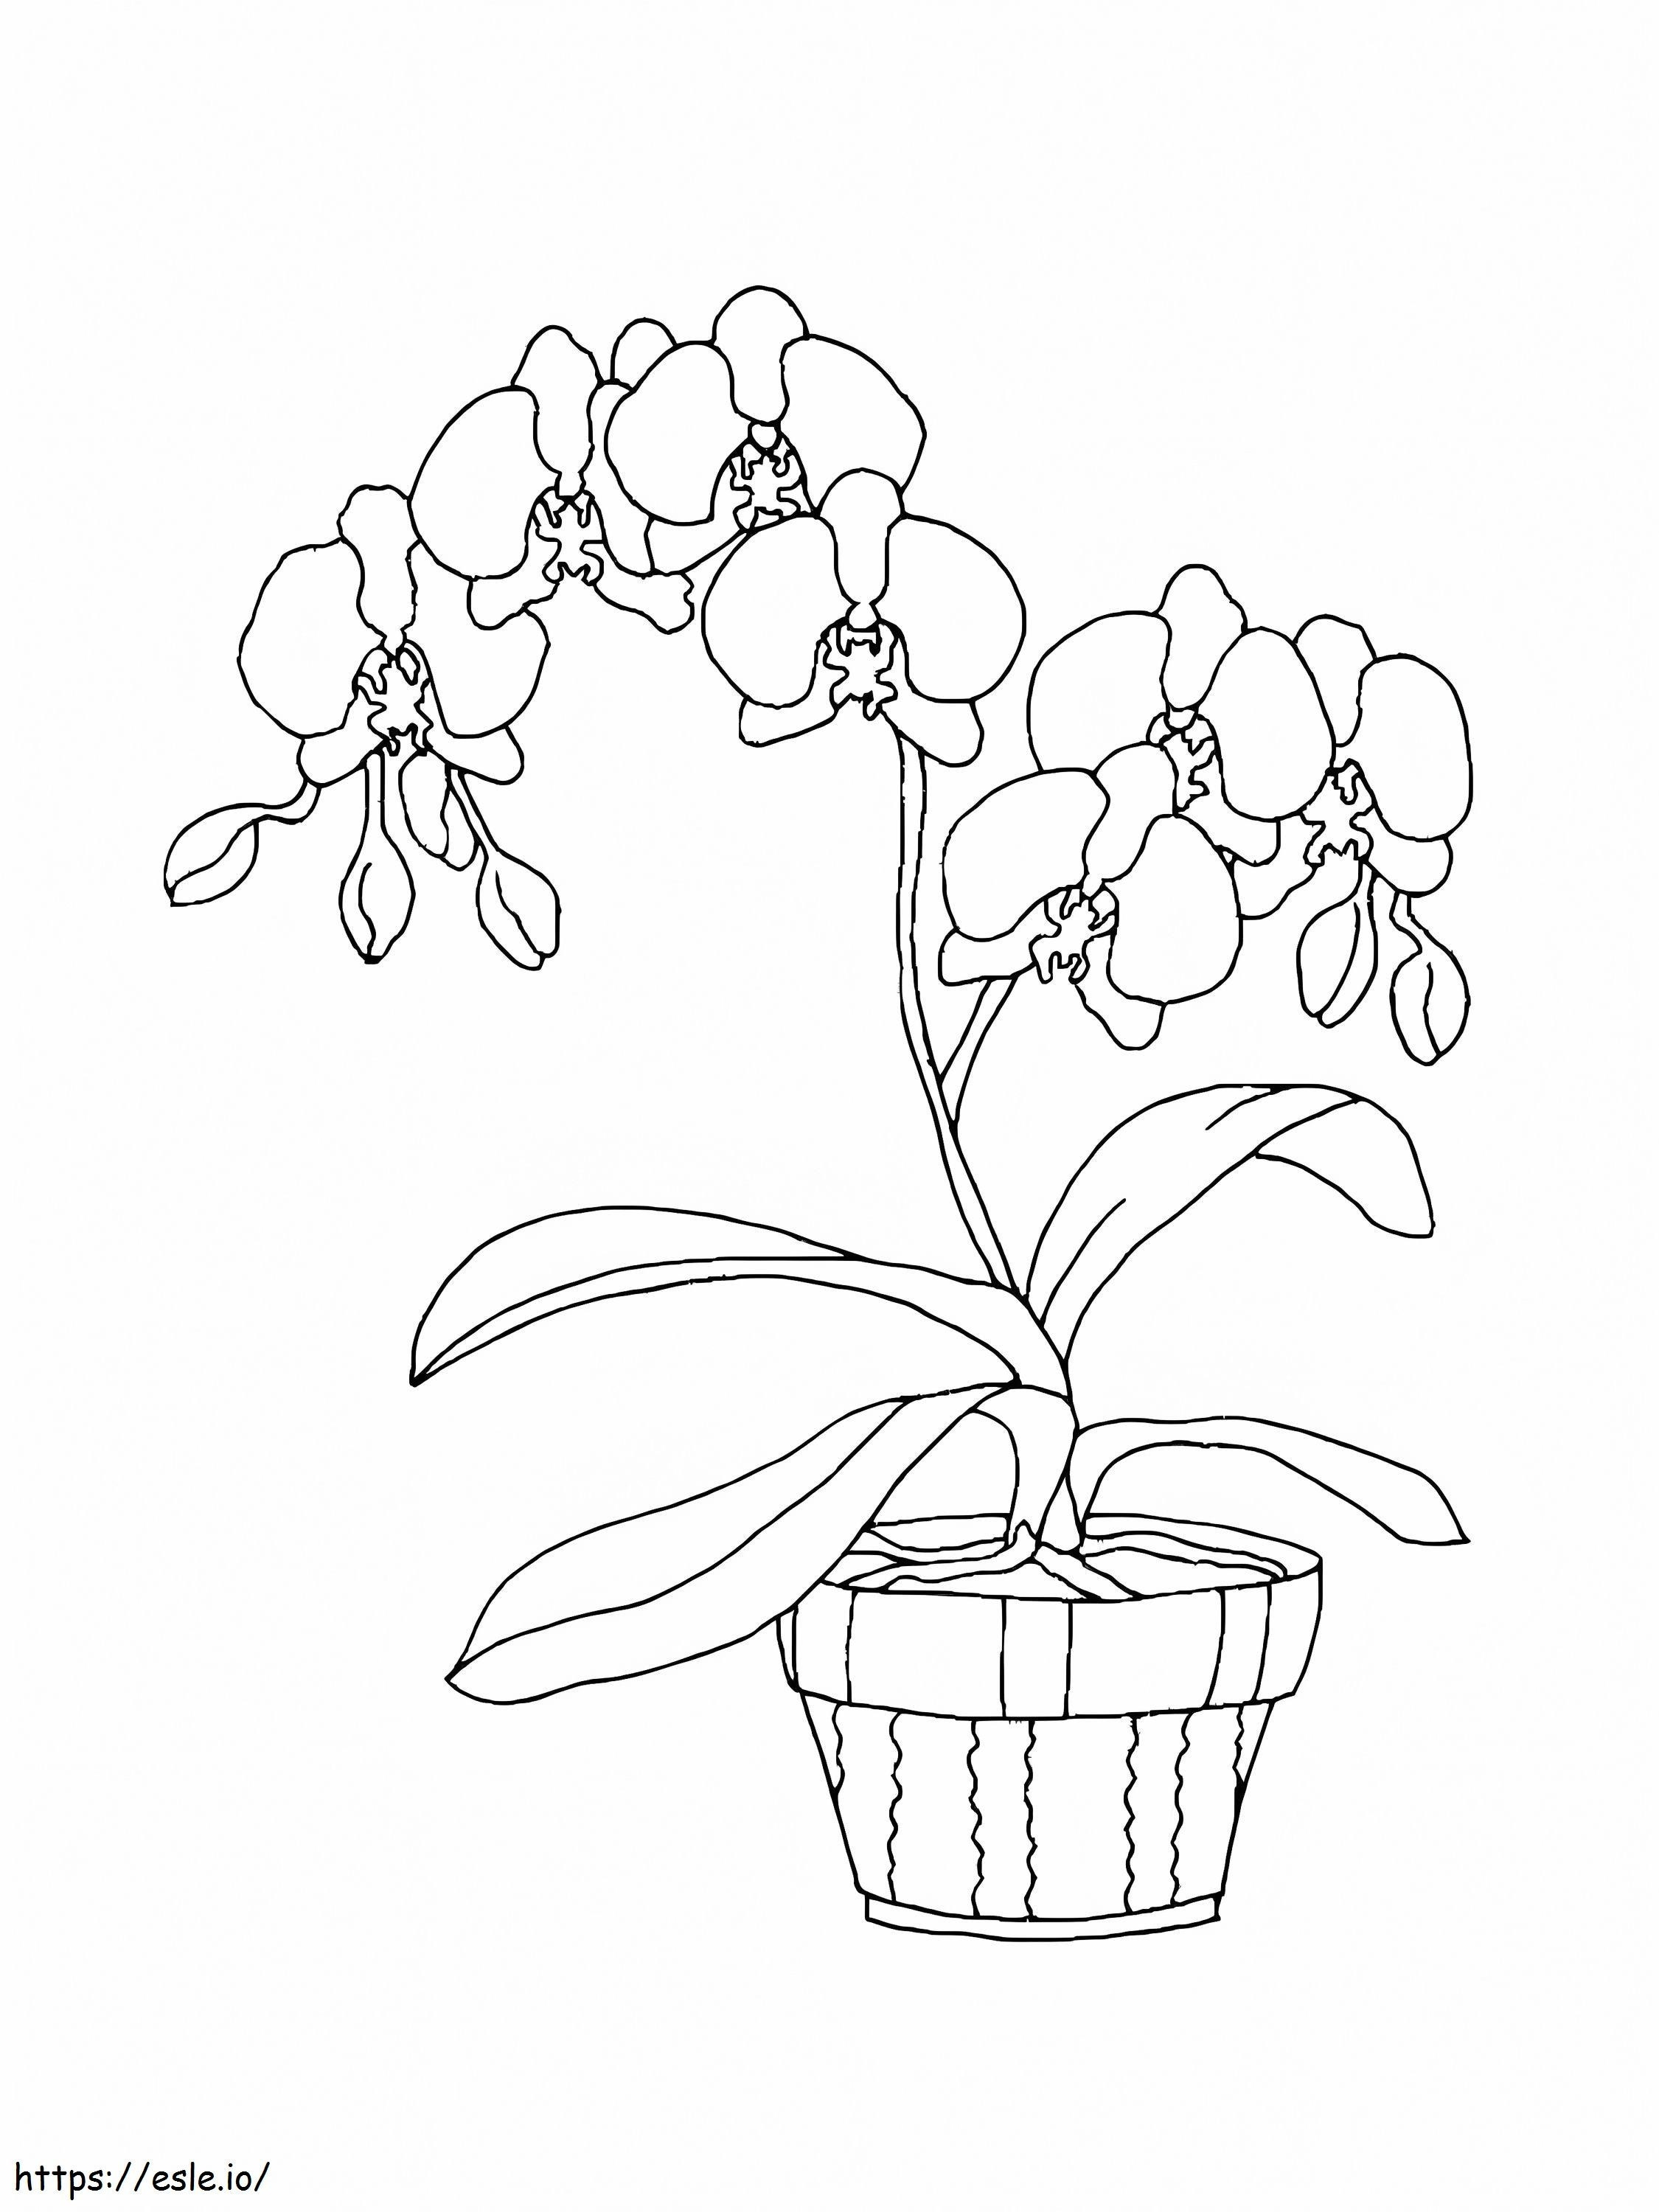 Orchid In A Pot coloring page